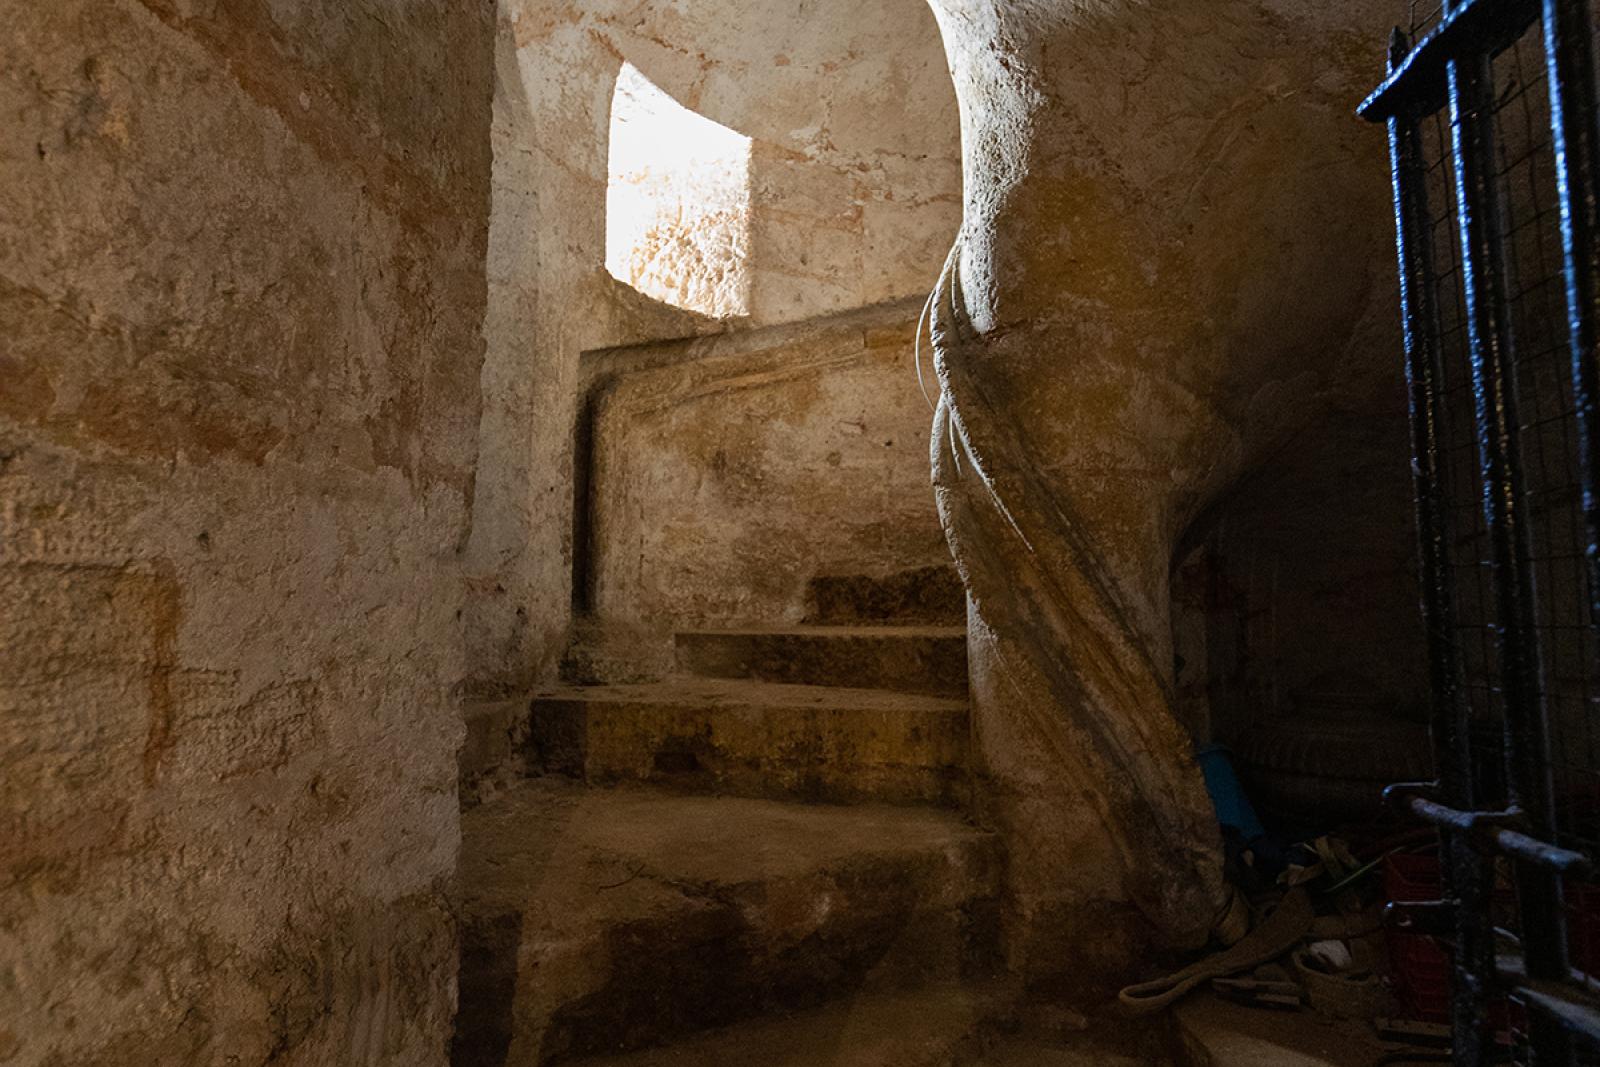 View of the oldest spiral staircase in Puerto Rico and America, built in mortar in the 16th century.